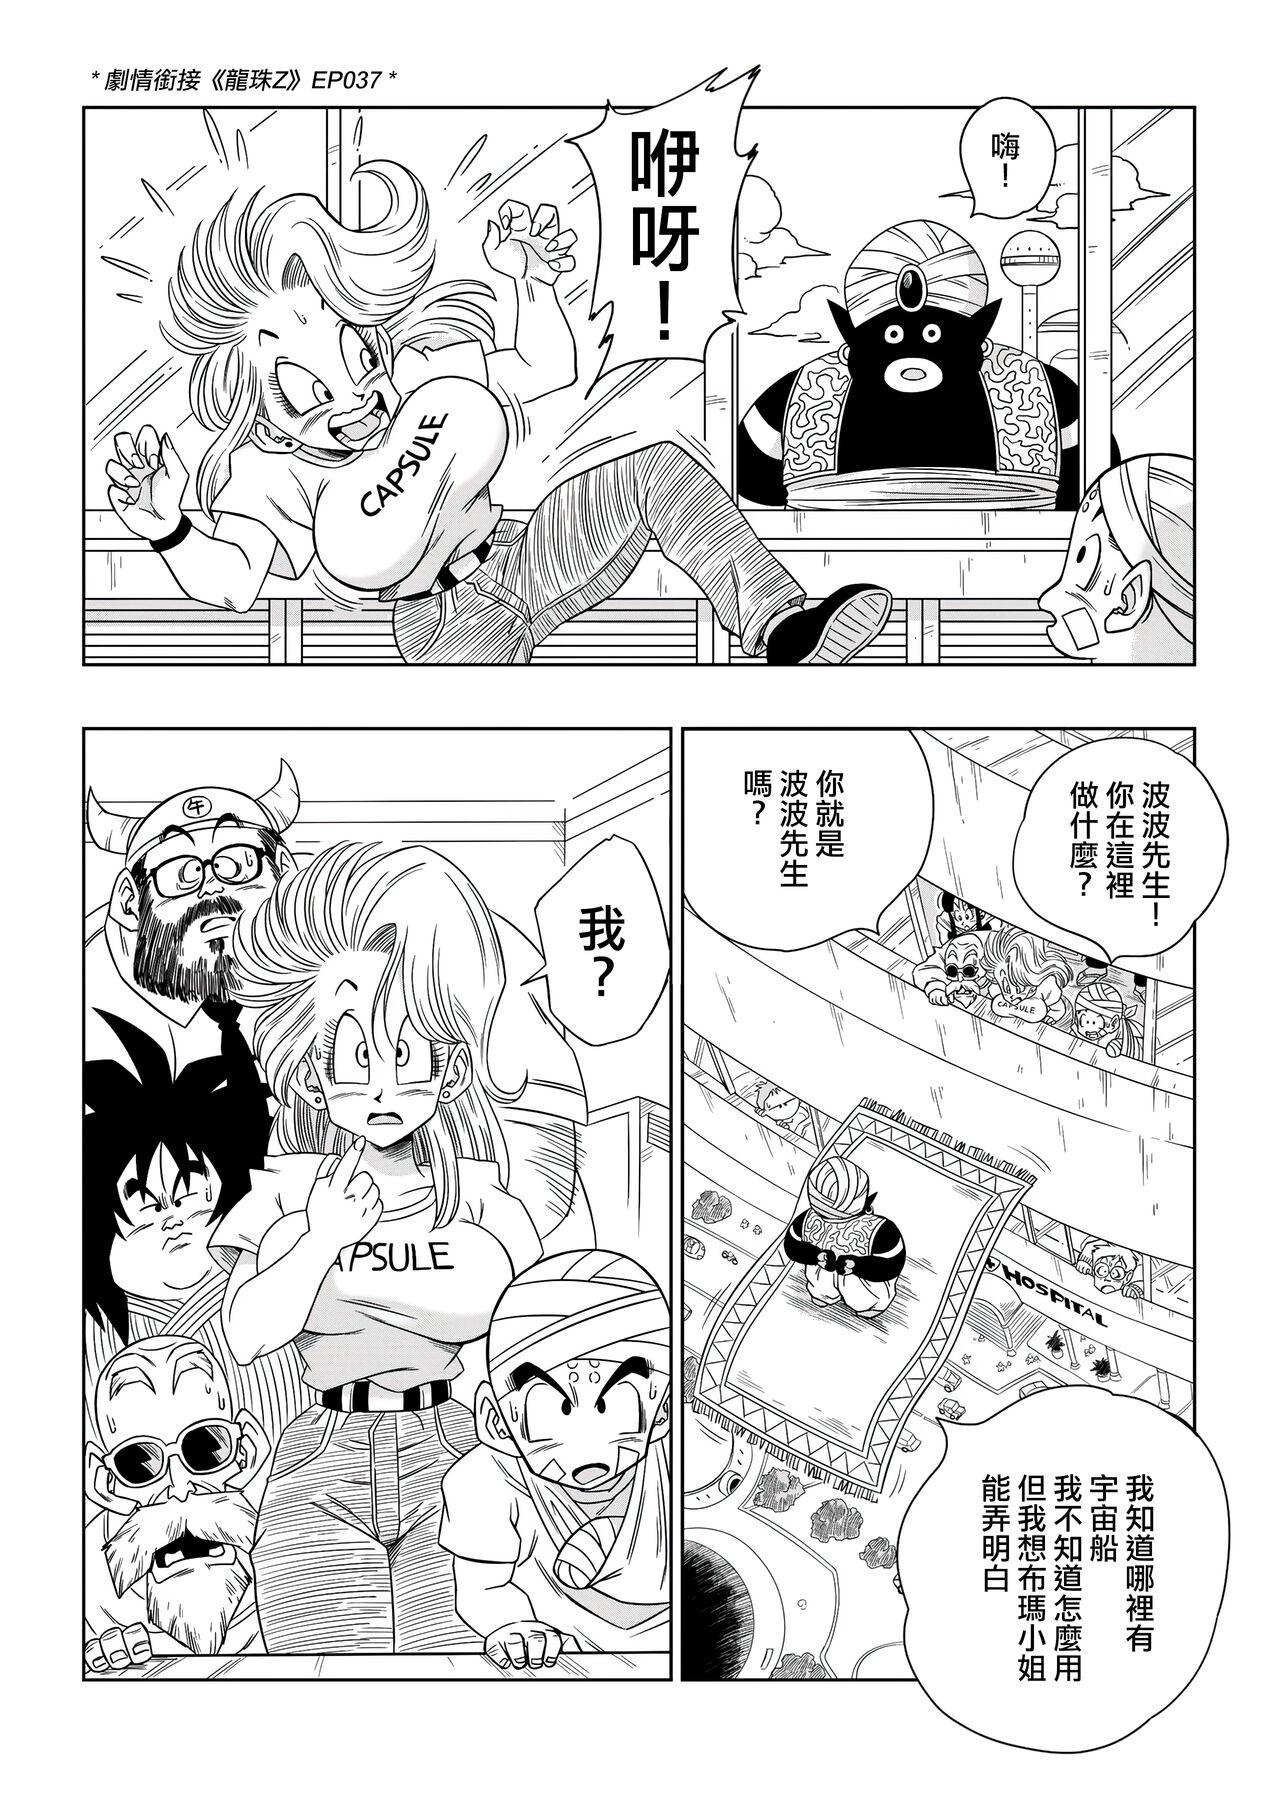 18 Porn Bulma Meets Mr.Popo - Sex inside the Mysterious Spaceship! - Dragon ball z Bigcock - Page 3